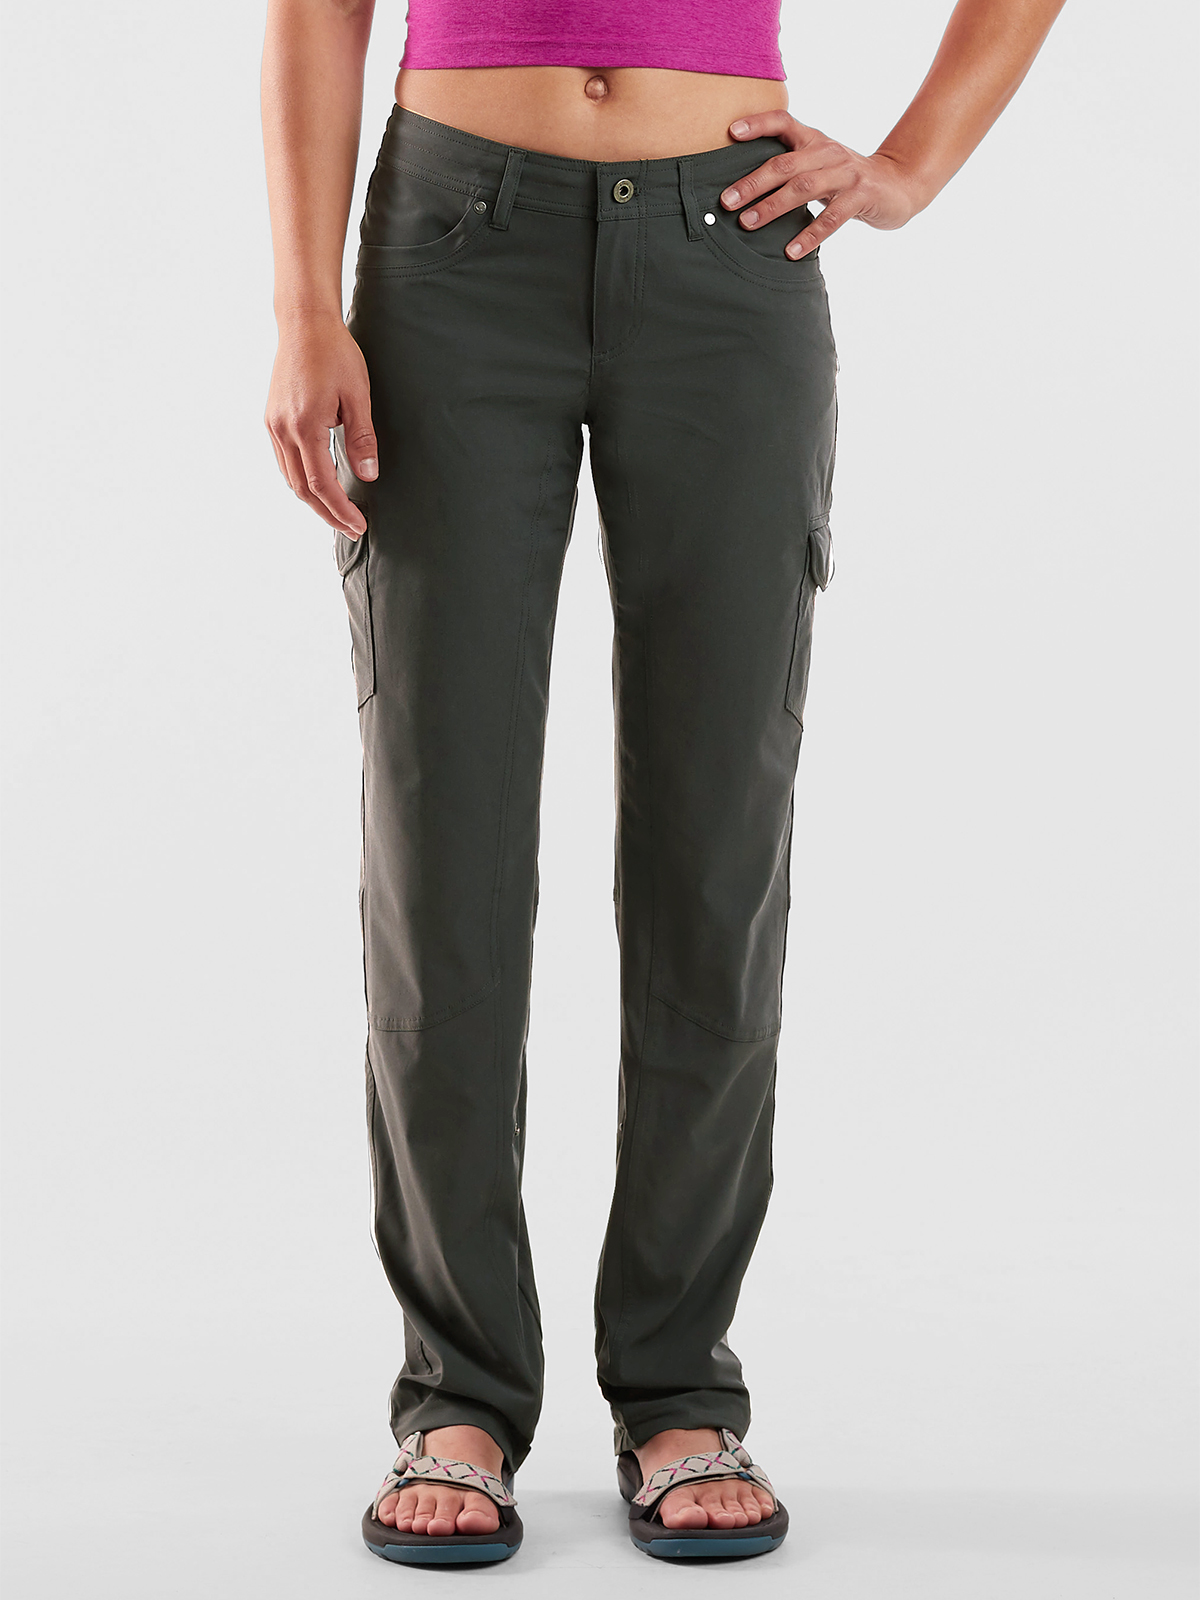 Athletic Works Women's Cargo Pant 